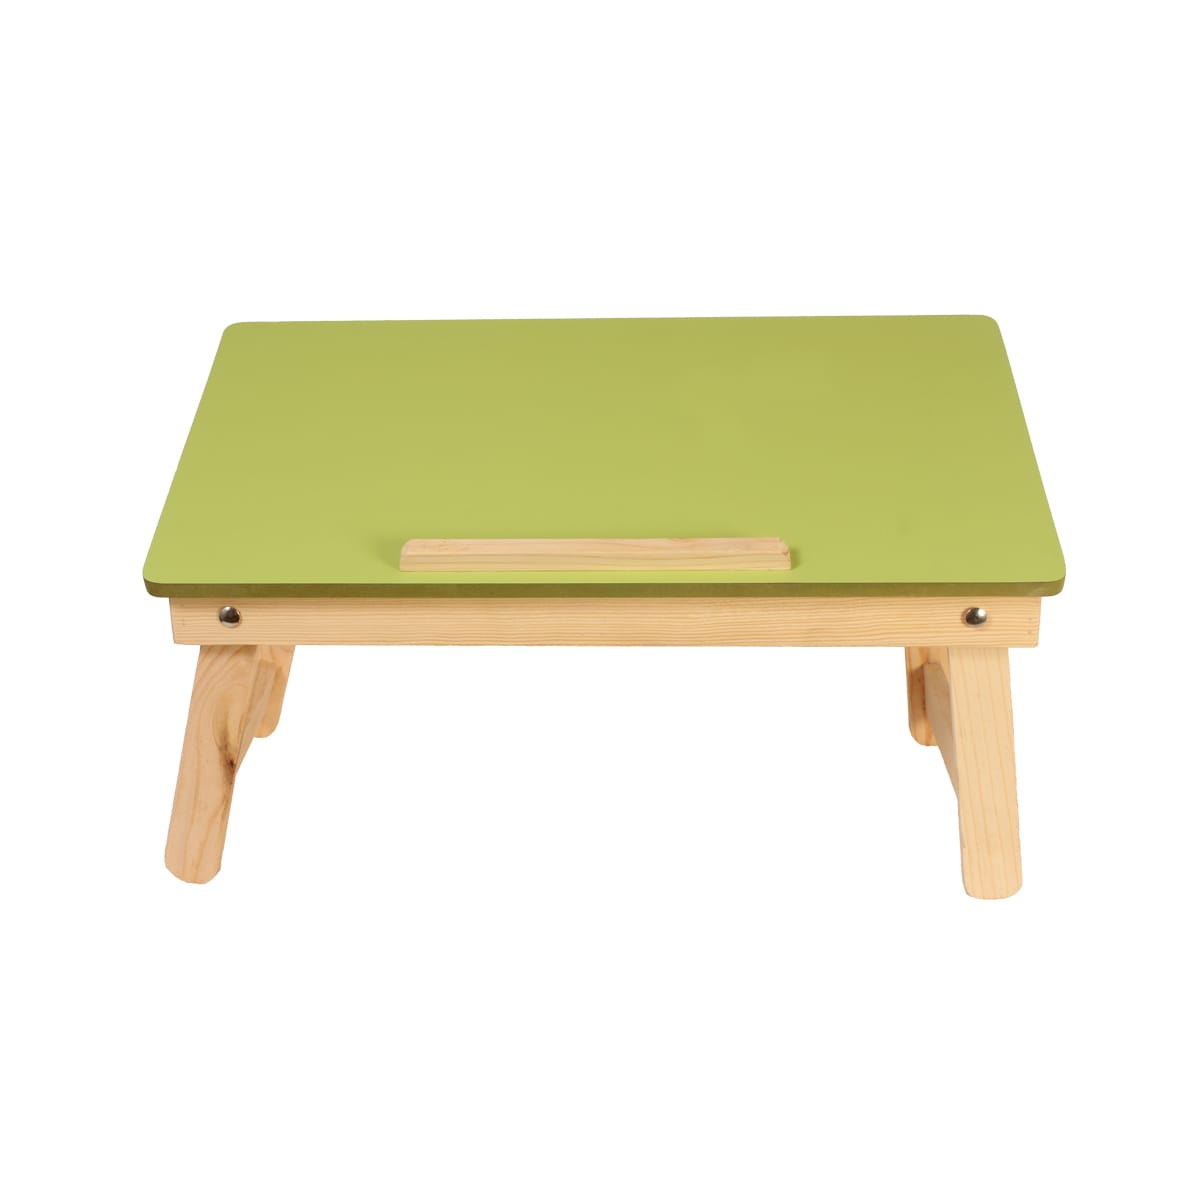 Green wooden laptop table